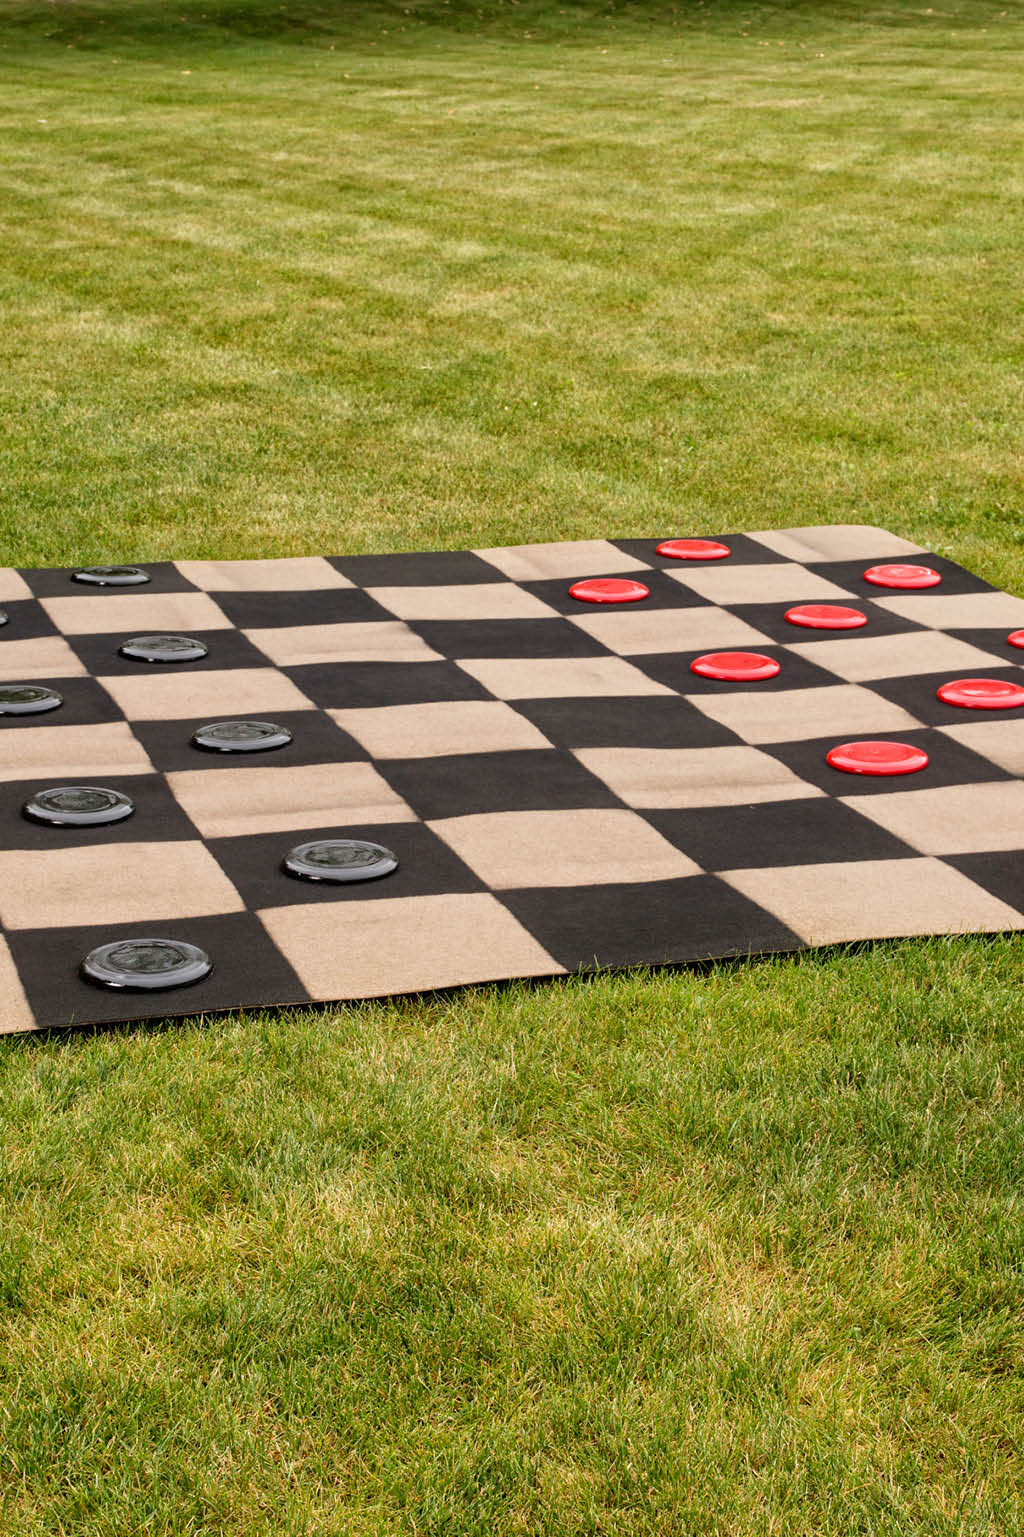 life-sized-checkers